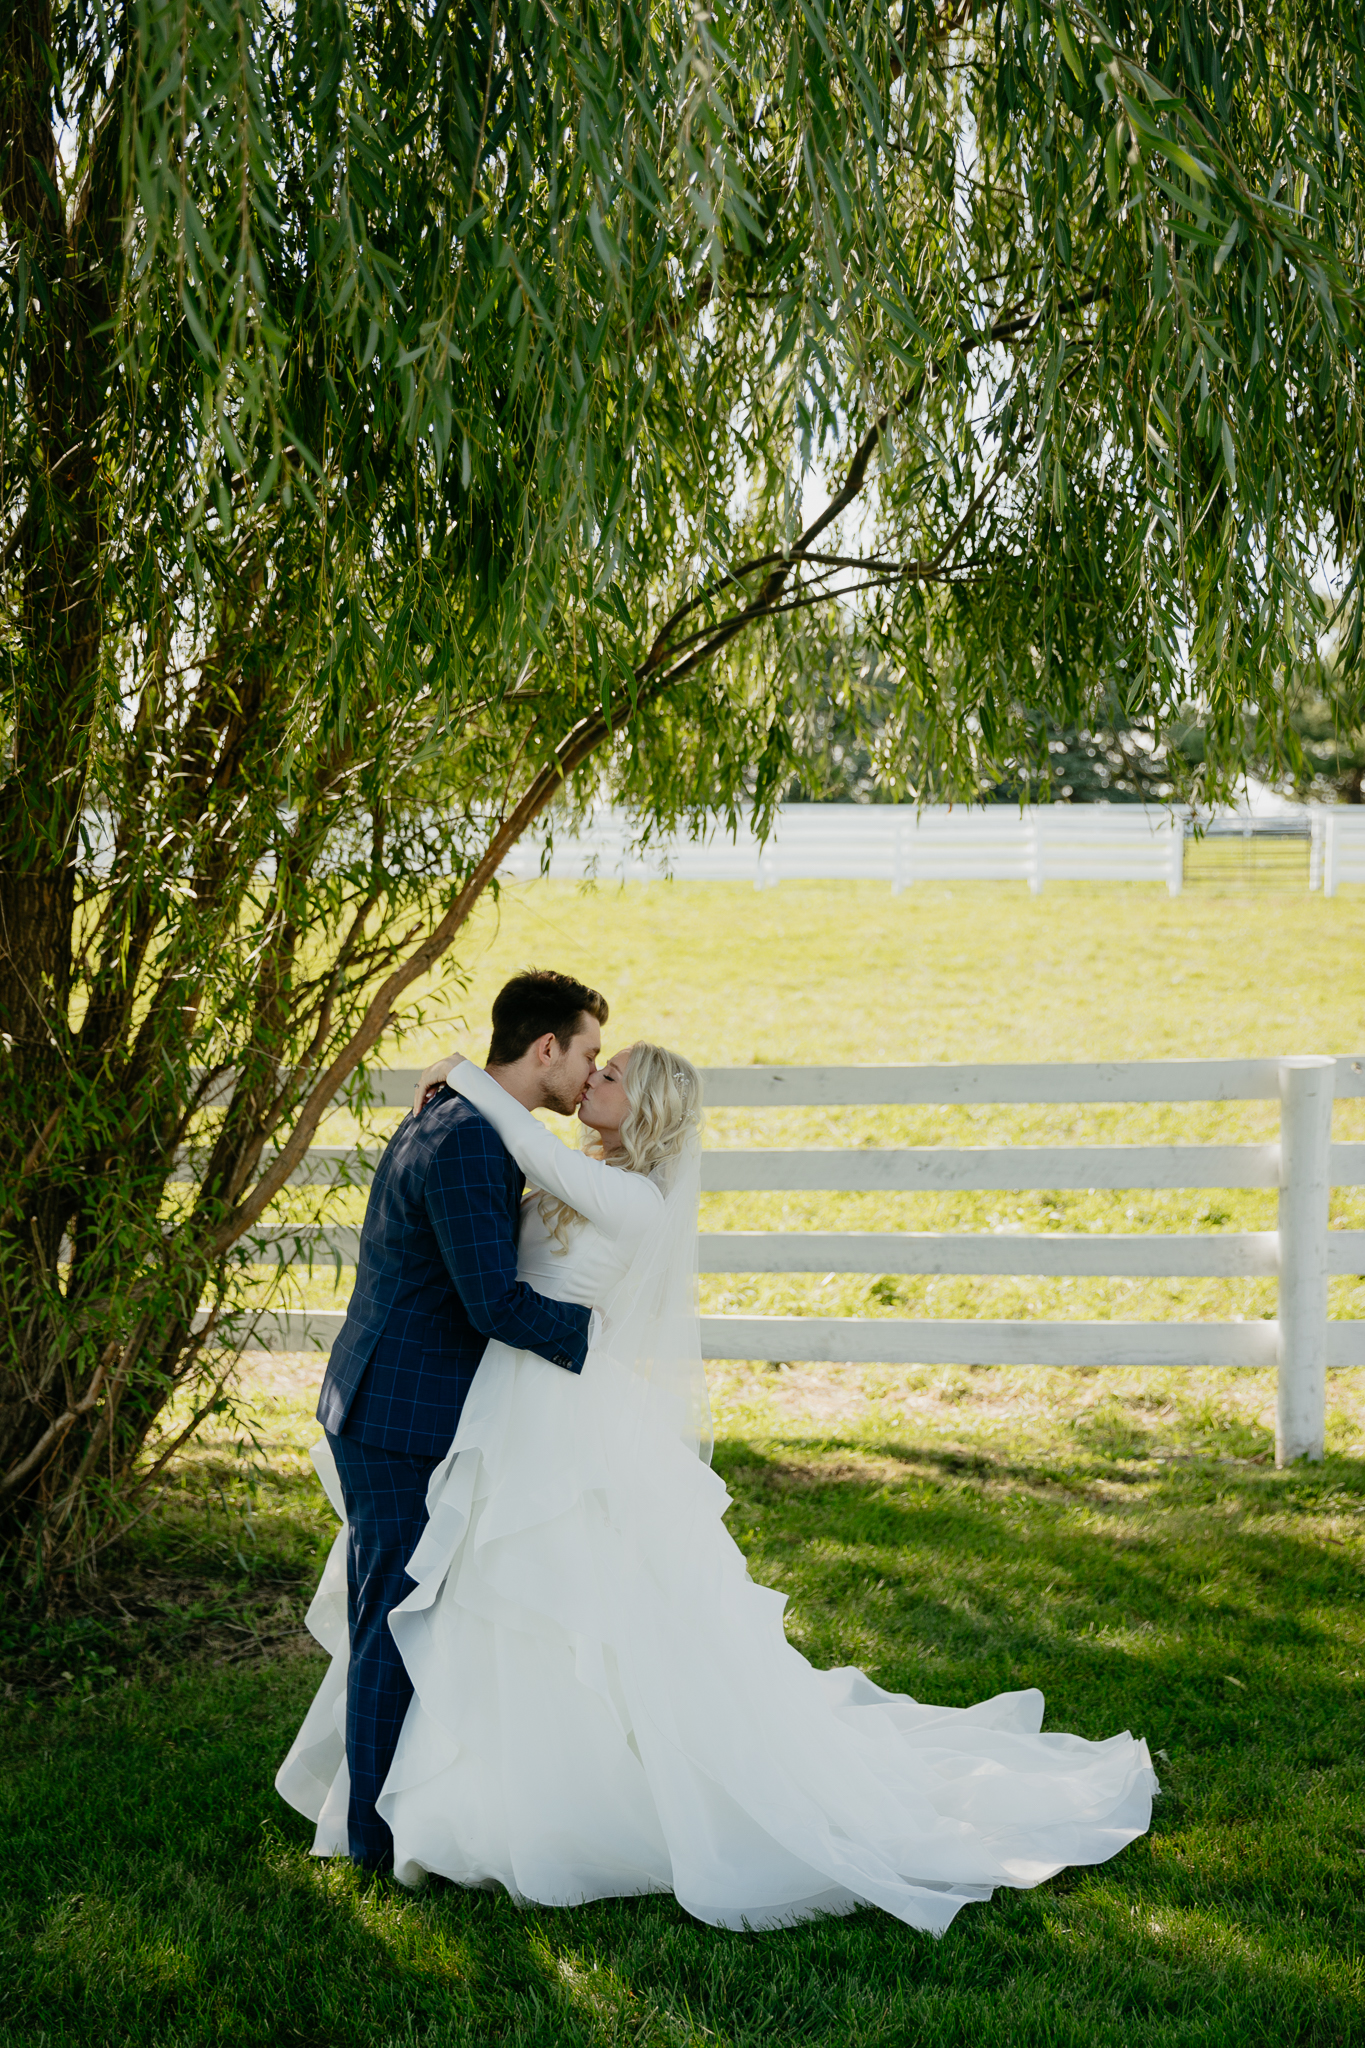 groom and bride read vows to each other underneath a willow tree